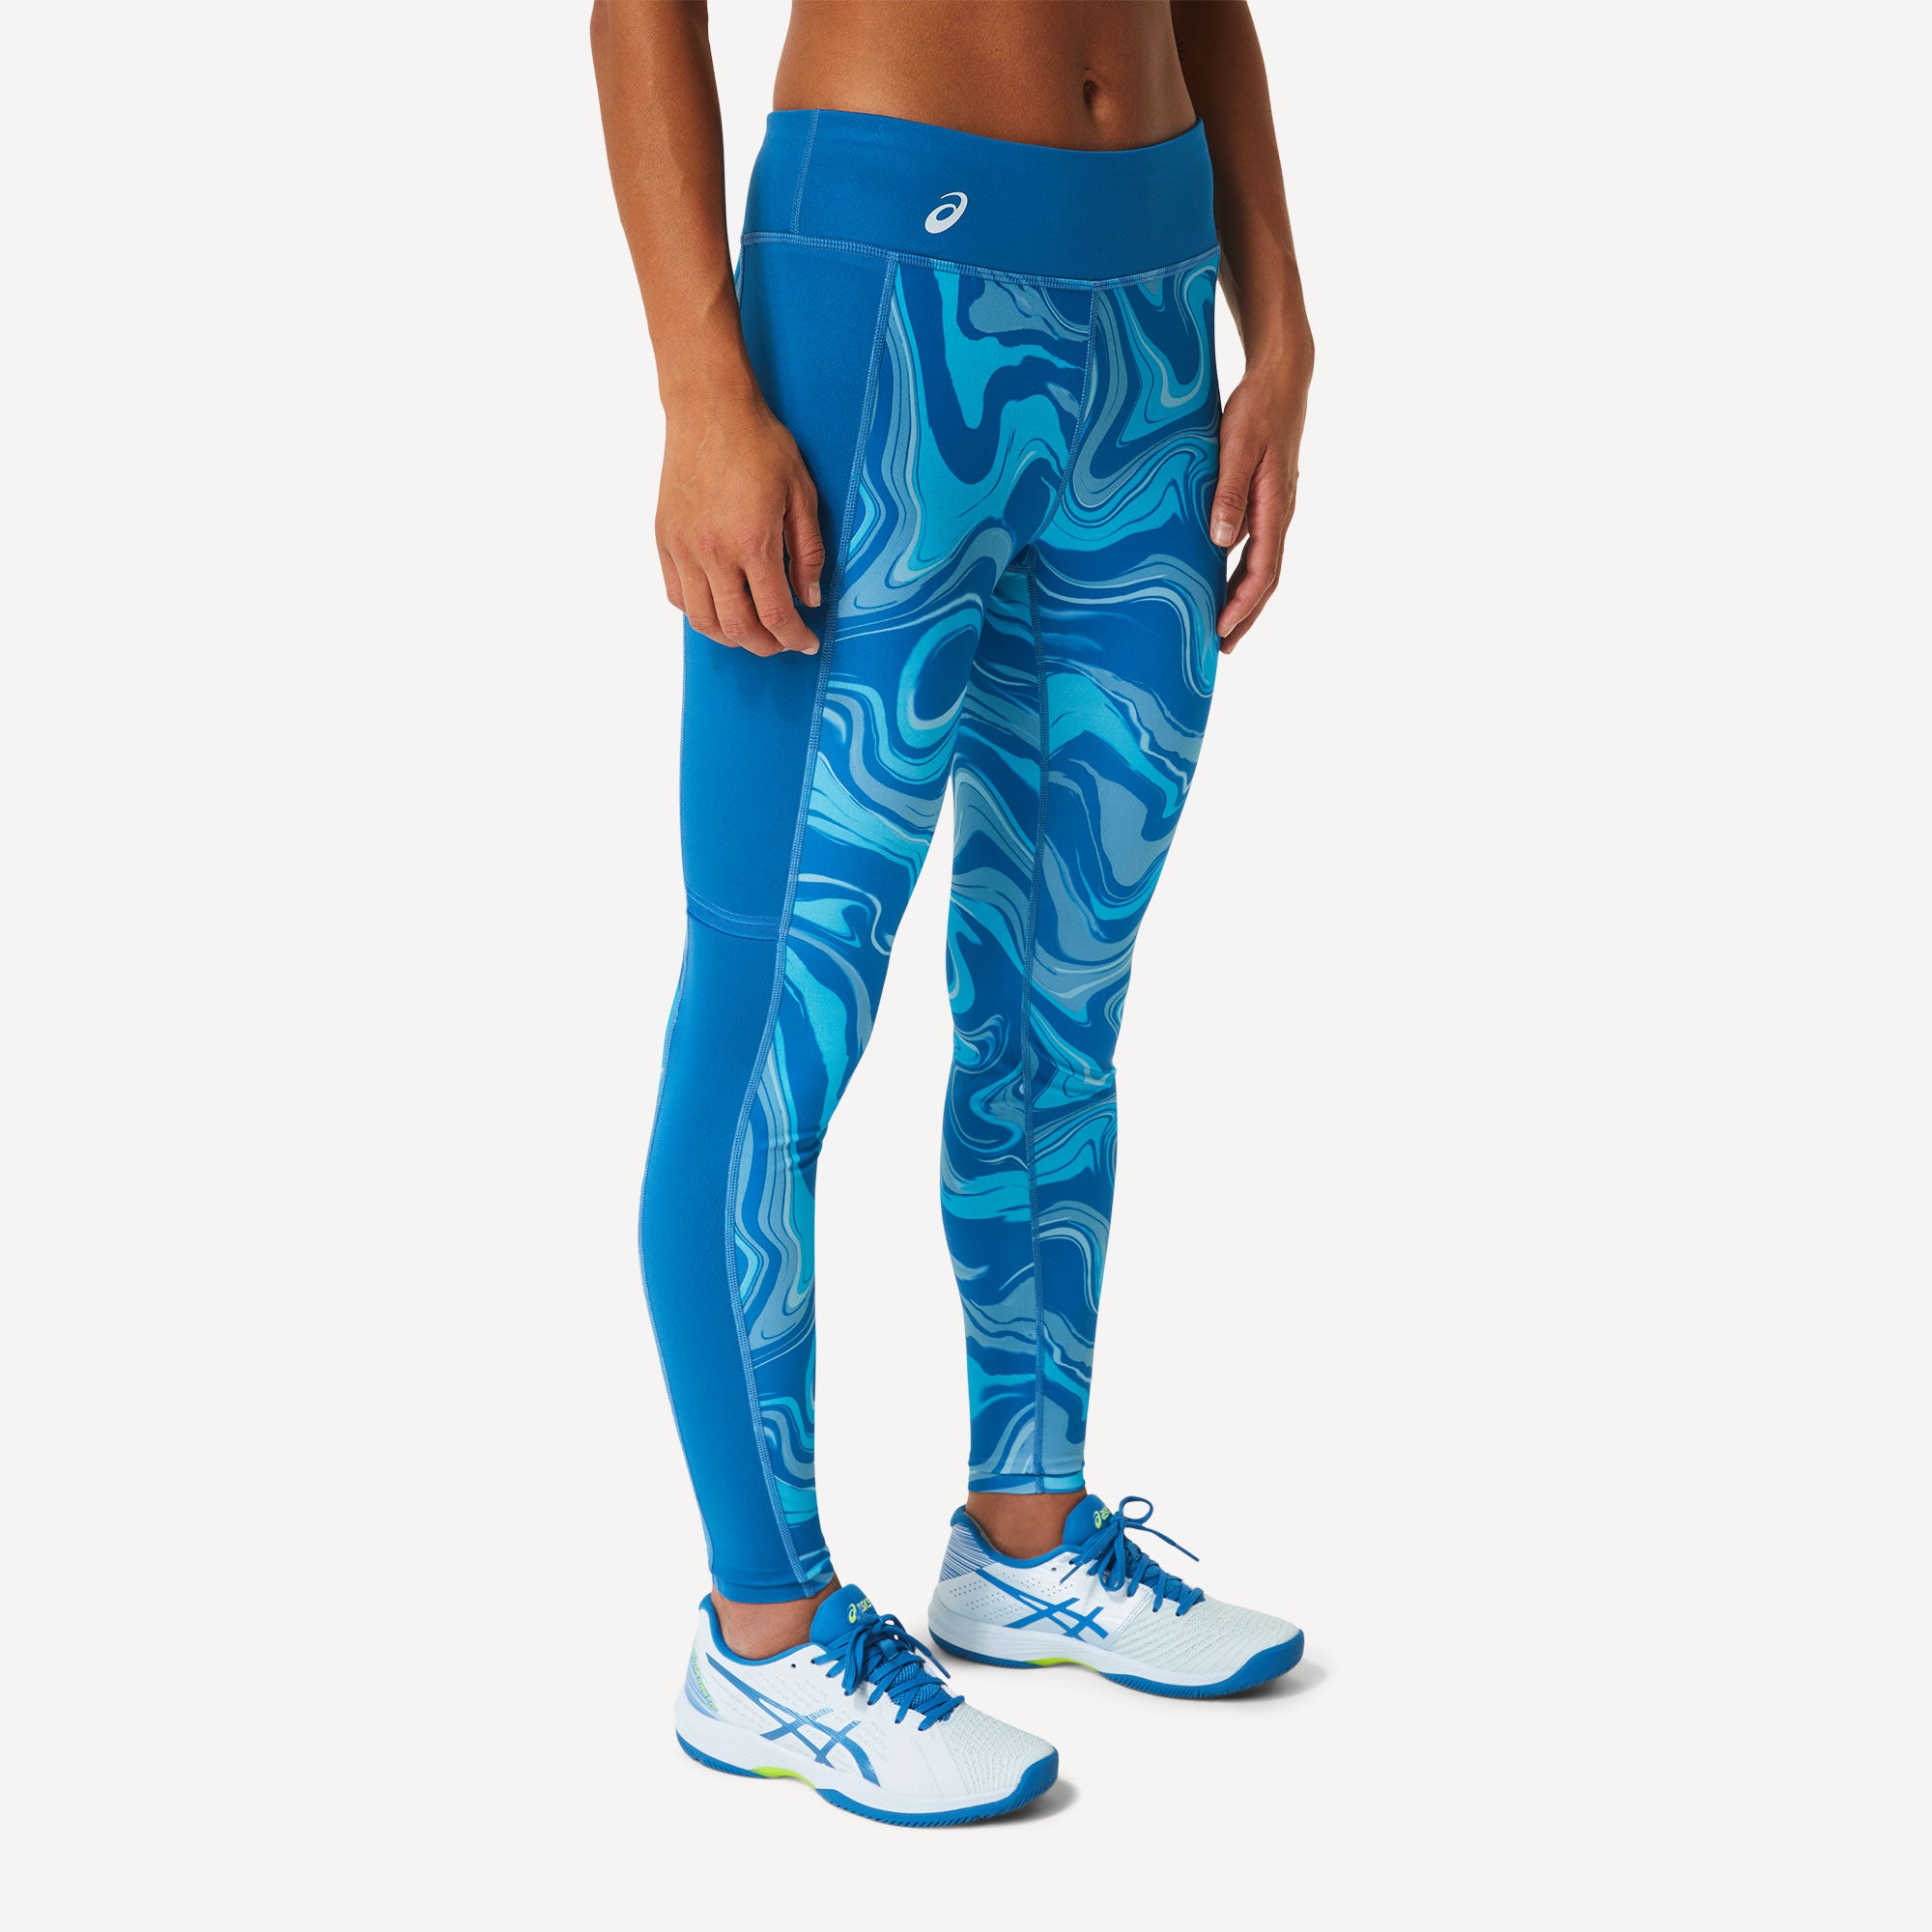 ASICS Women's Graphic Tights Blue (3)